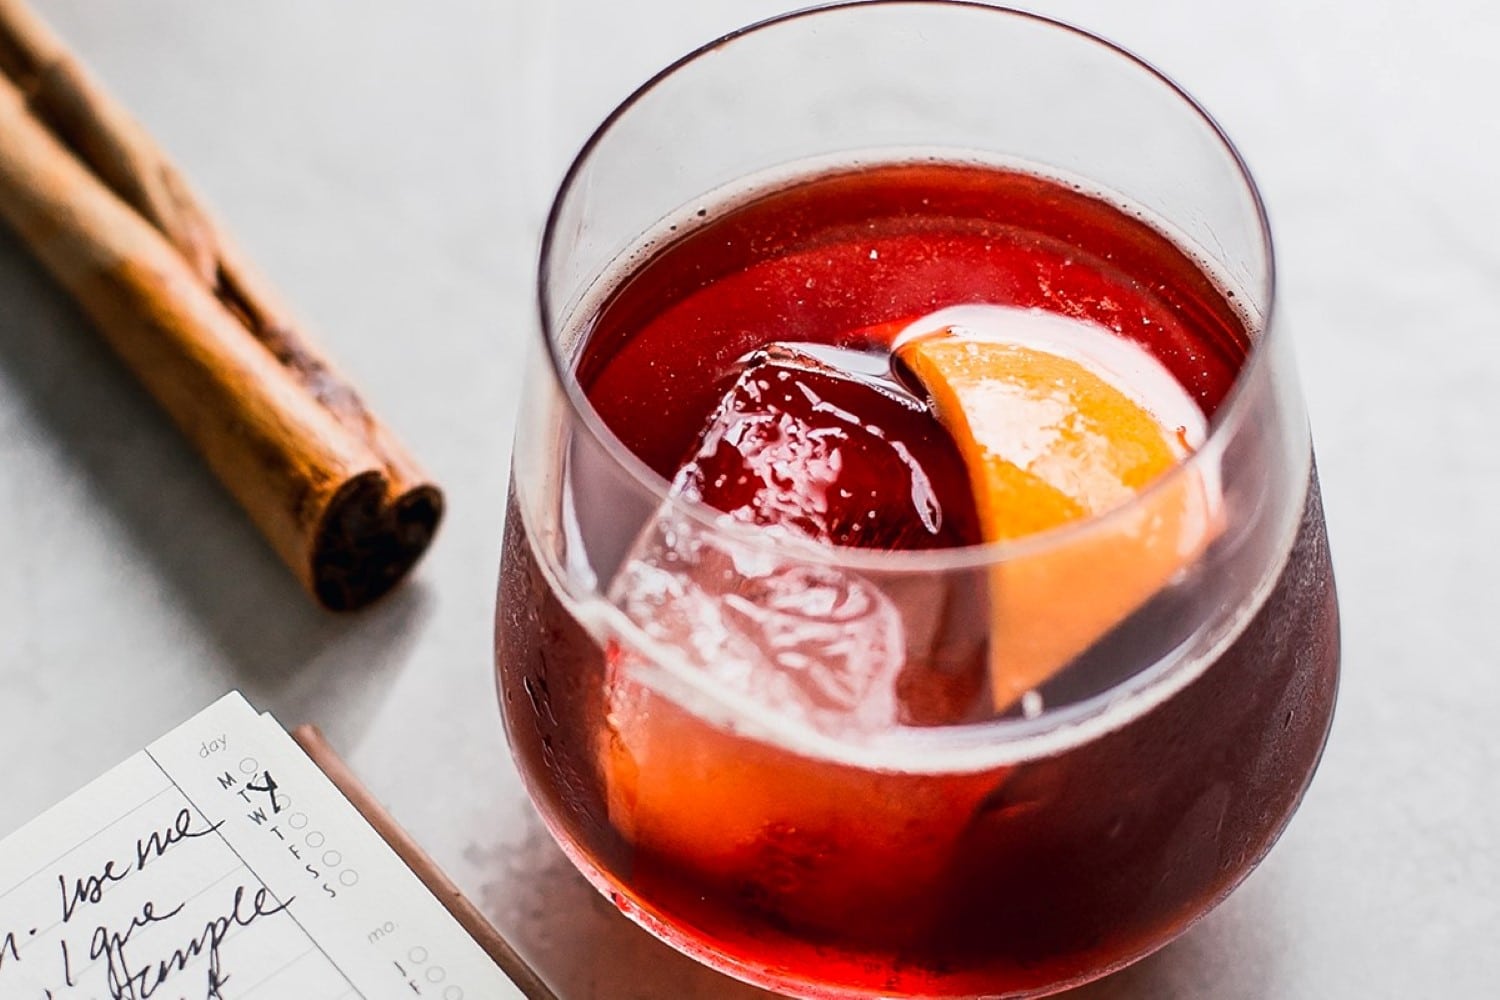 Get the Spiced Negroni recipe